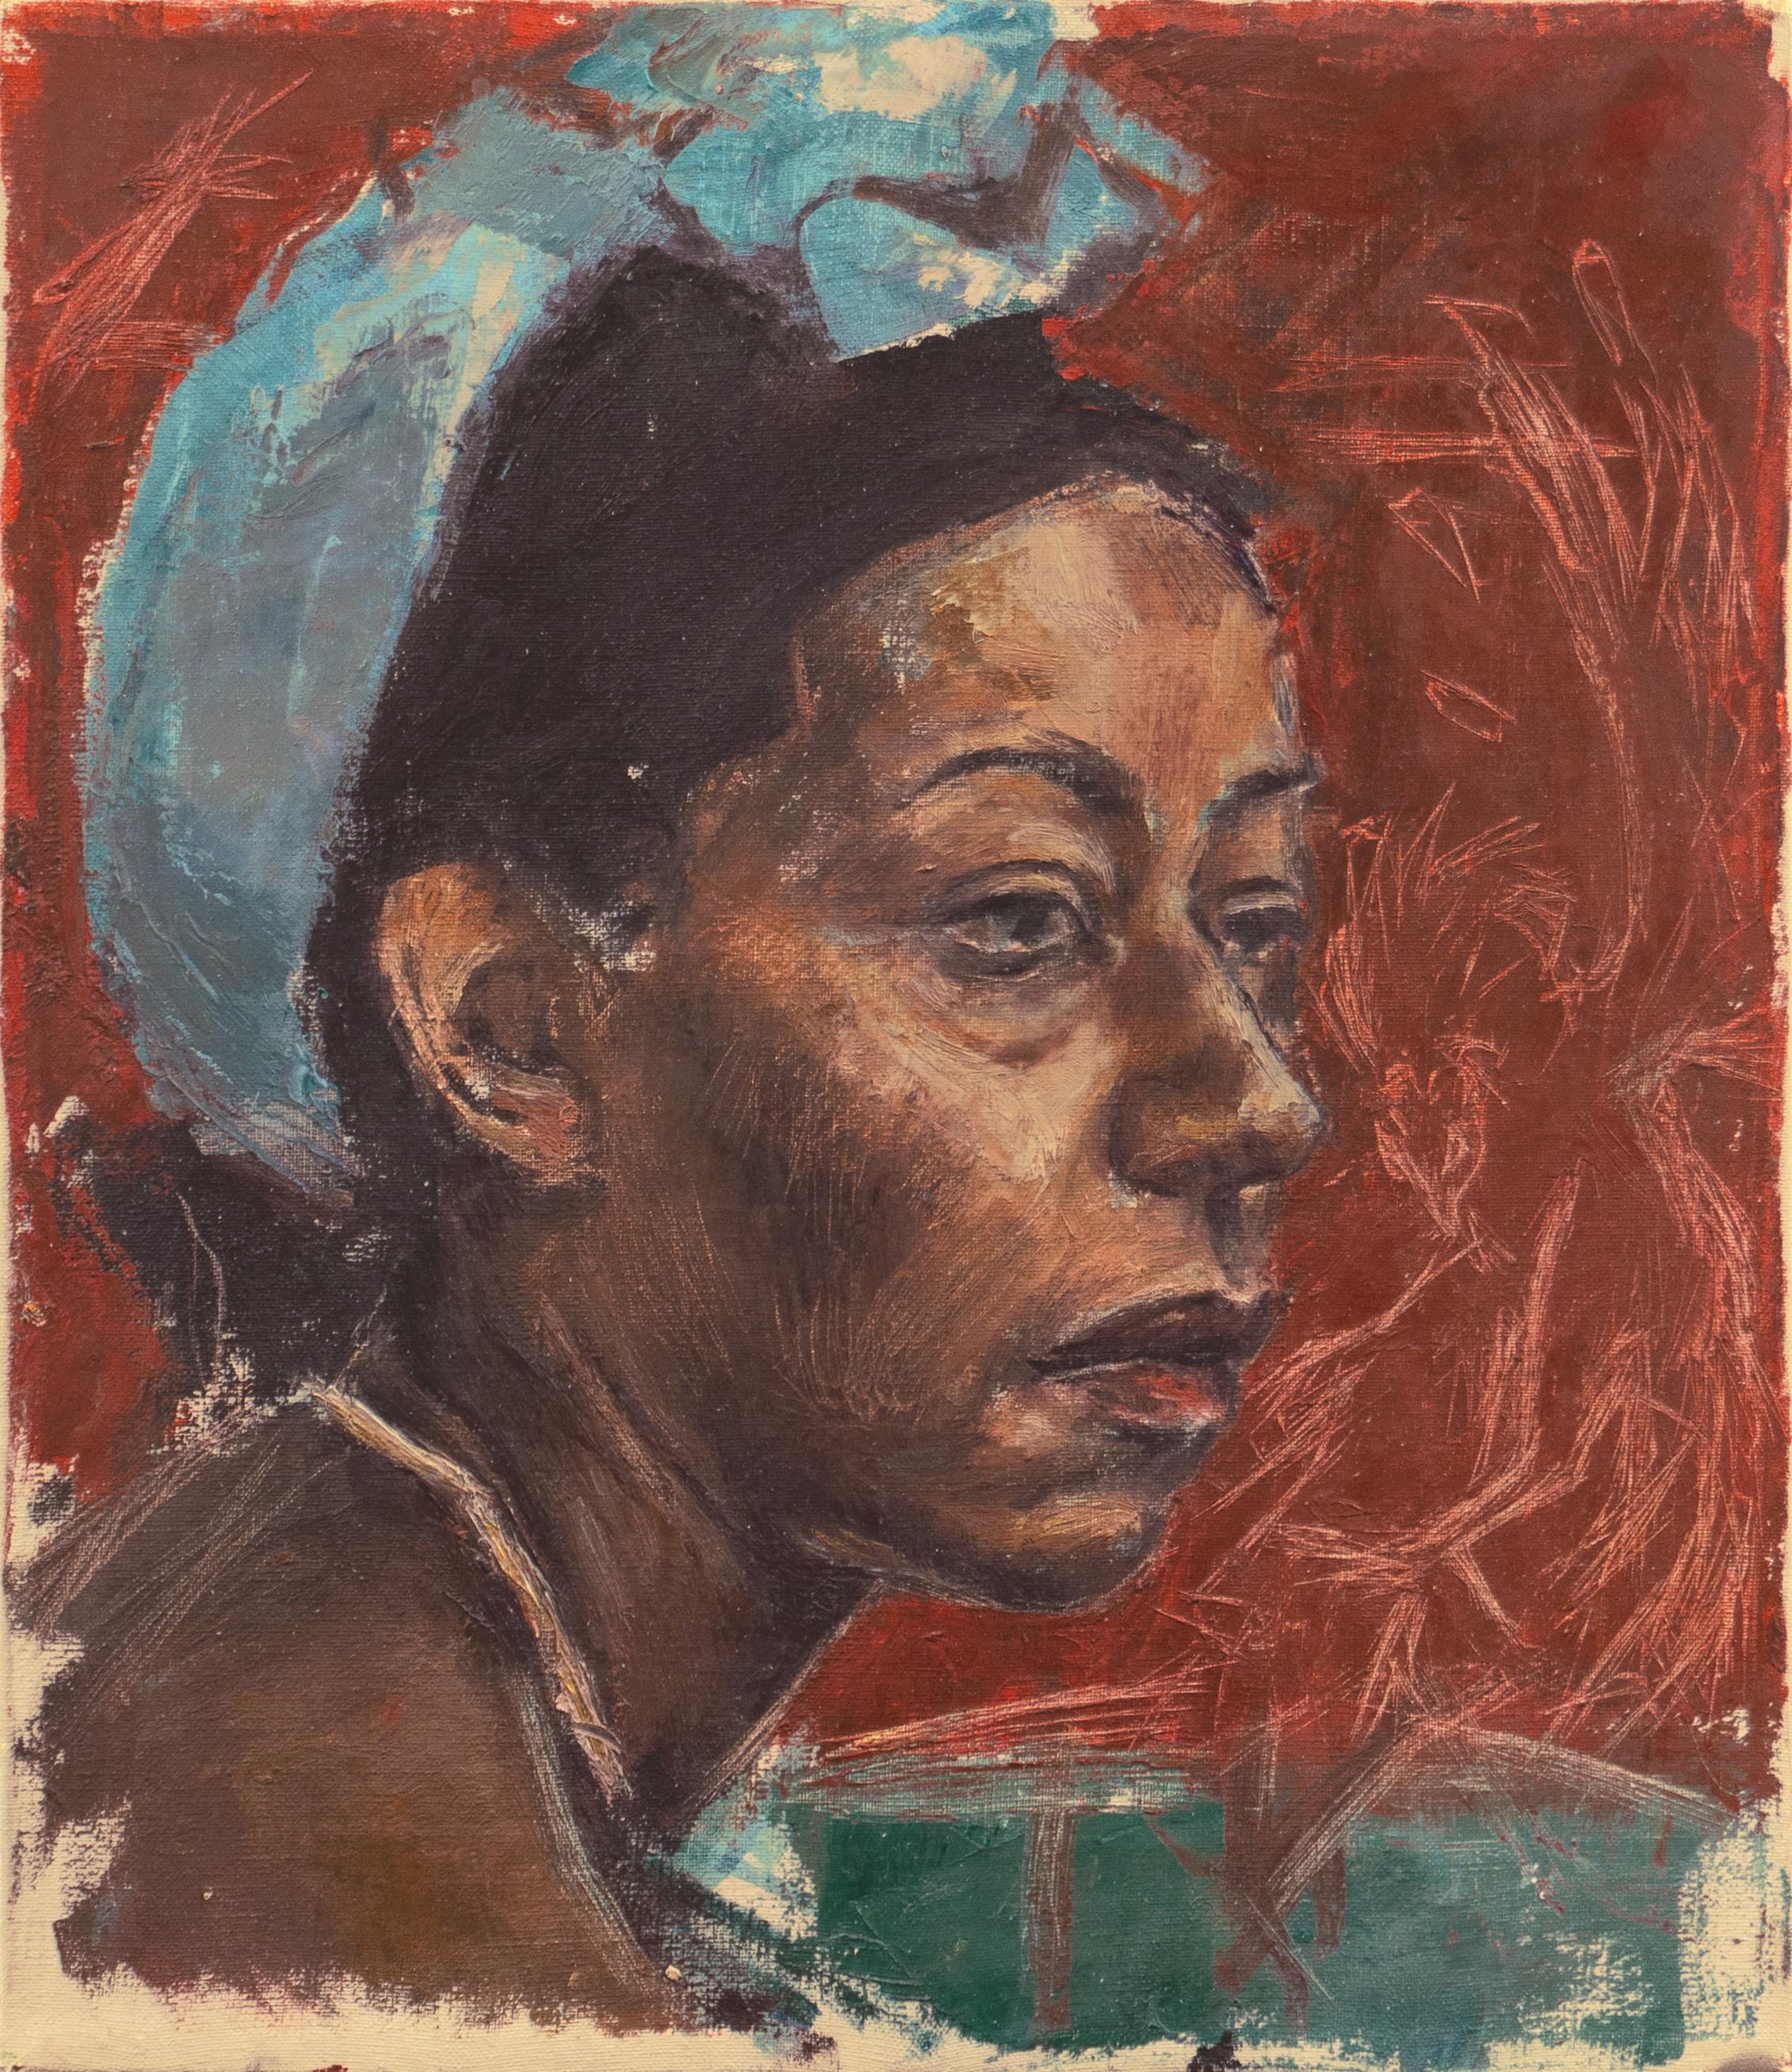 20th century American School Portrait Painting - 'The Blue Scarf', 1960's African American Oil, Study of a Black Woman, Phoenix